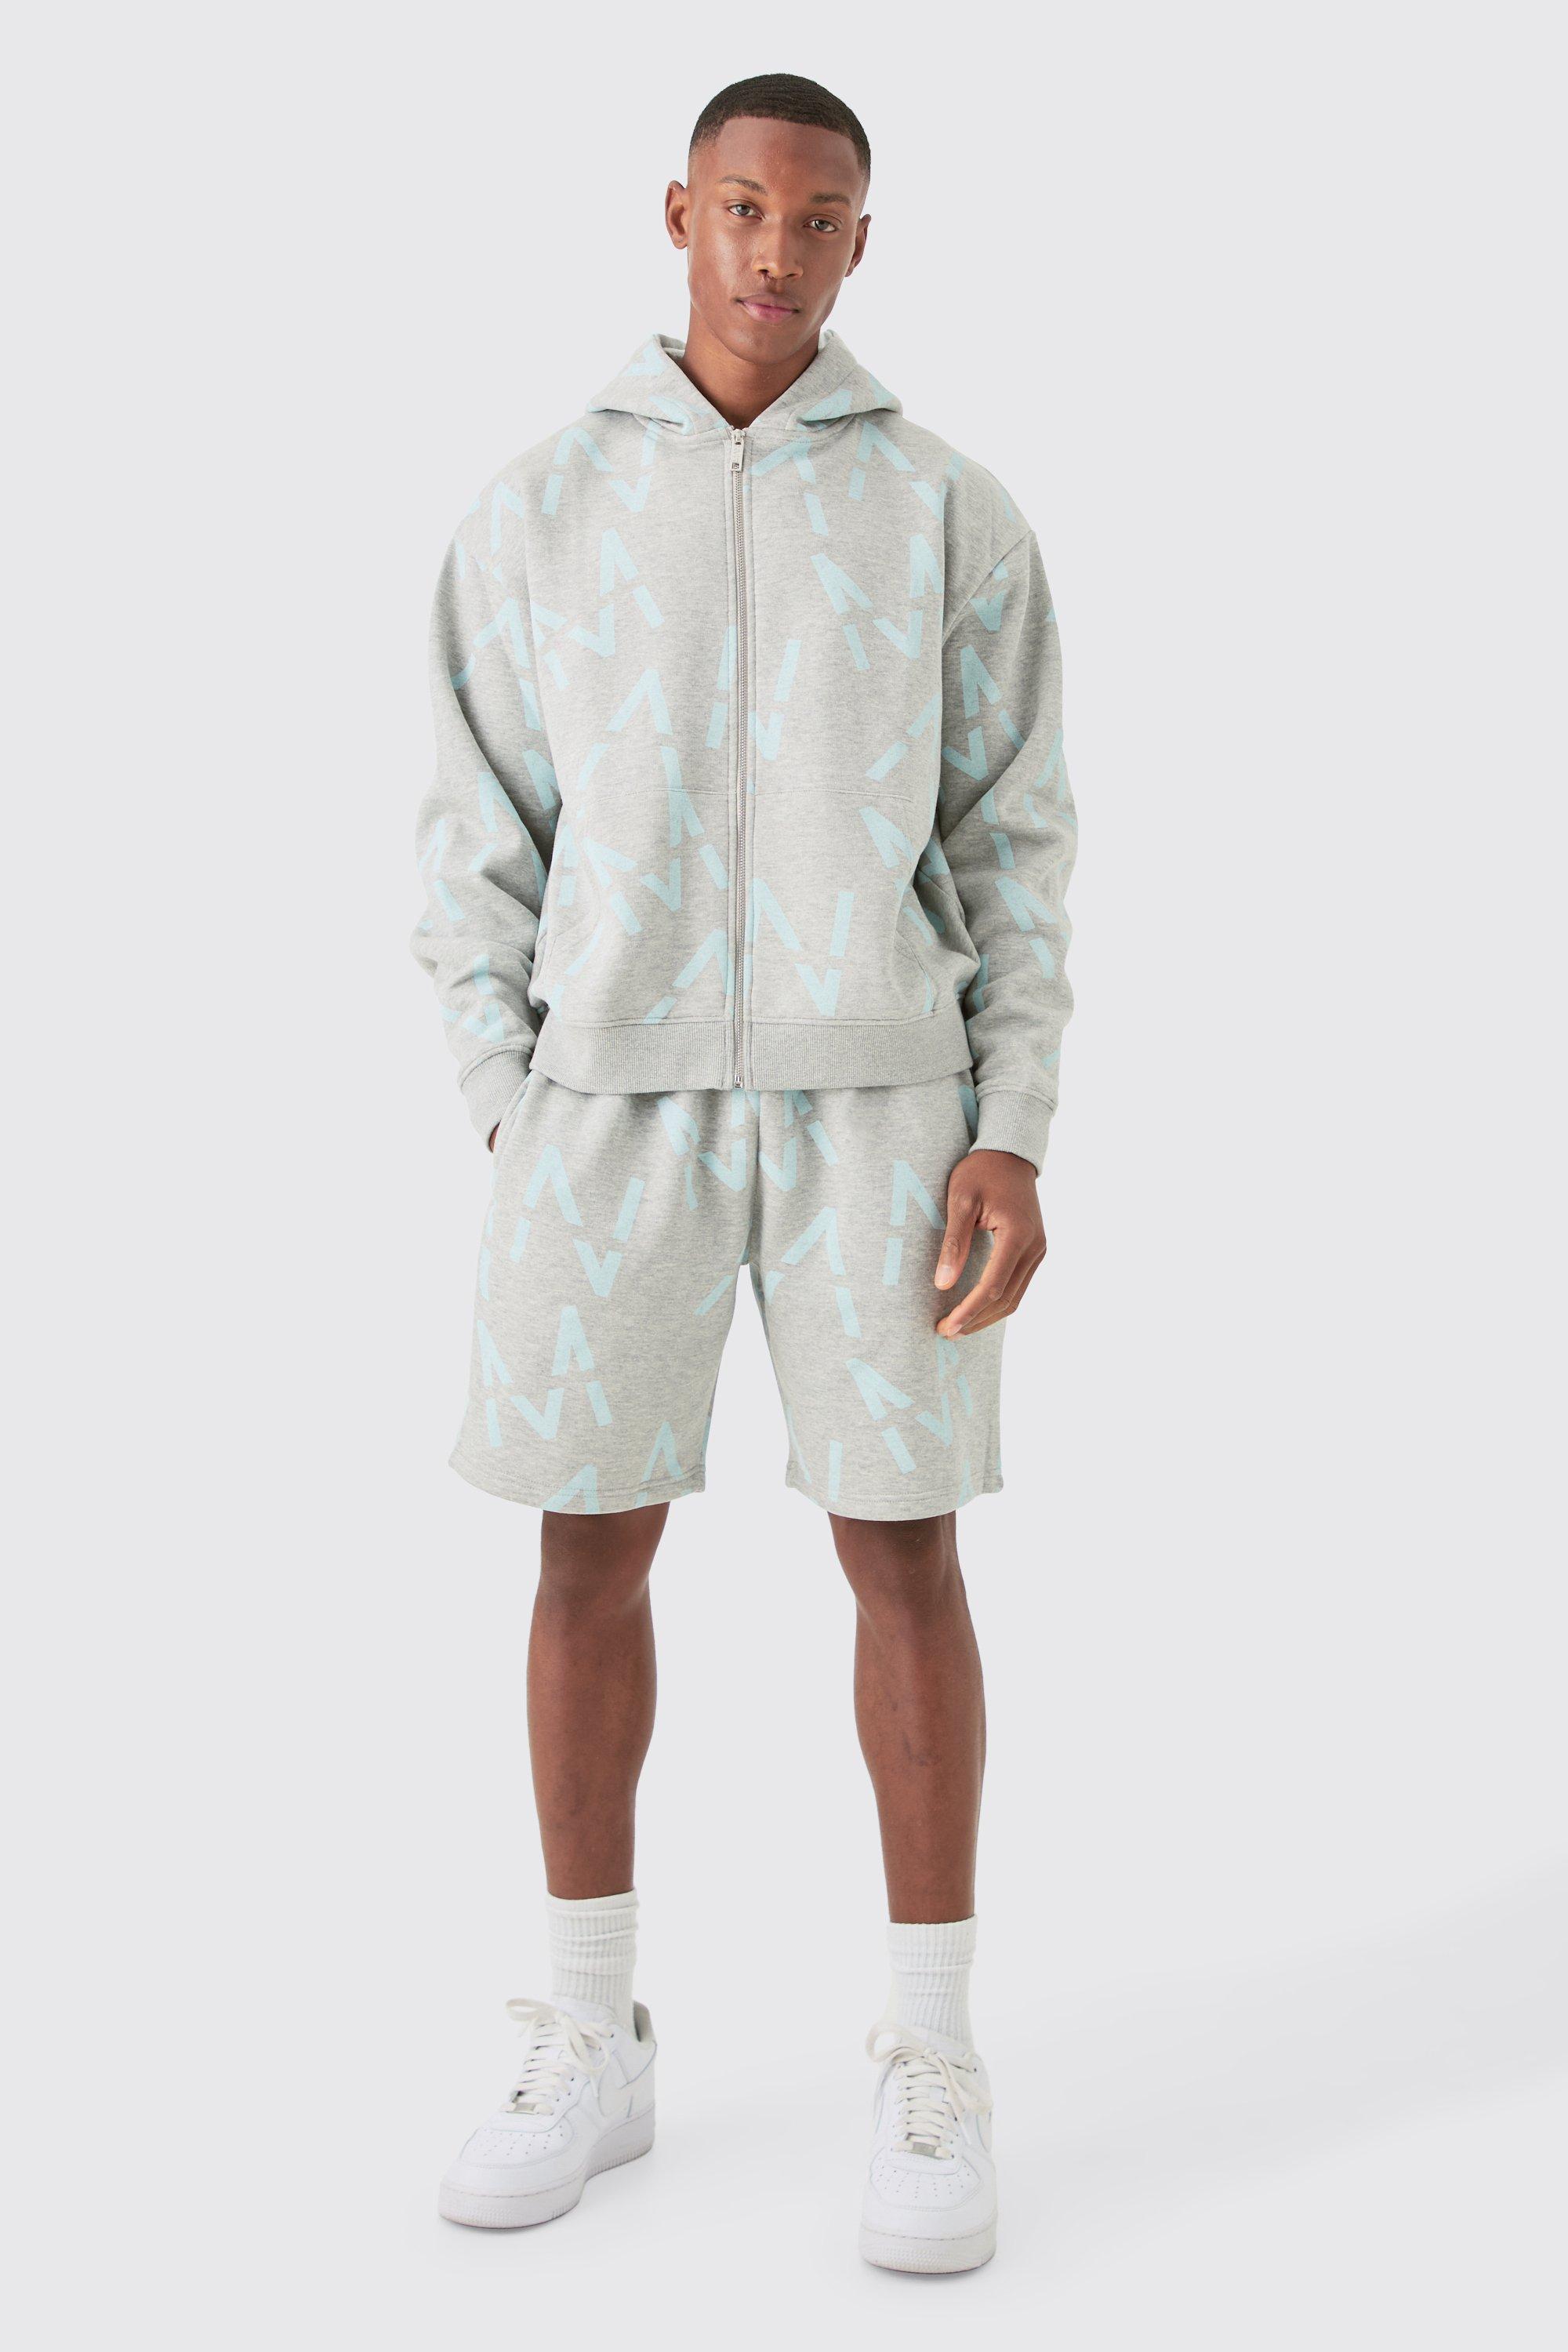 Image of Oversized Boxy Man All Over Print Zip Hoodie Short Tracksuit, Grigio